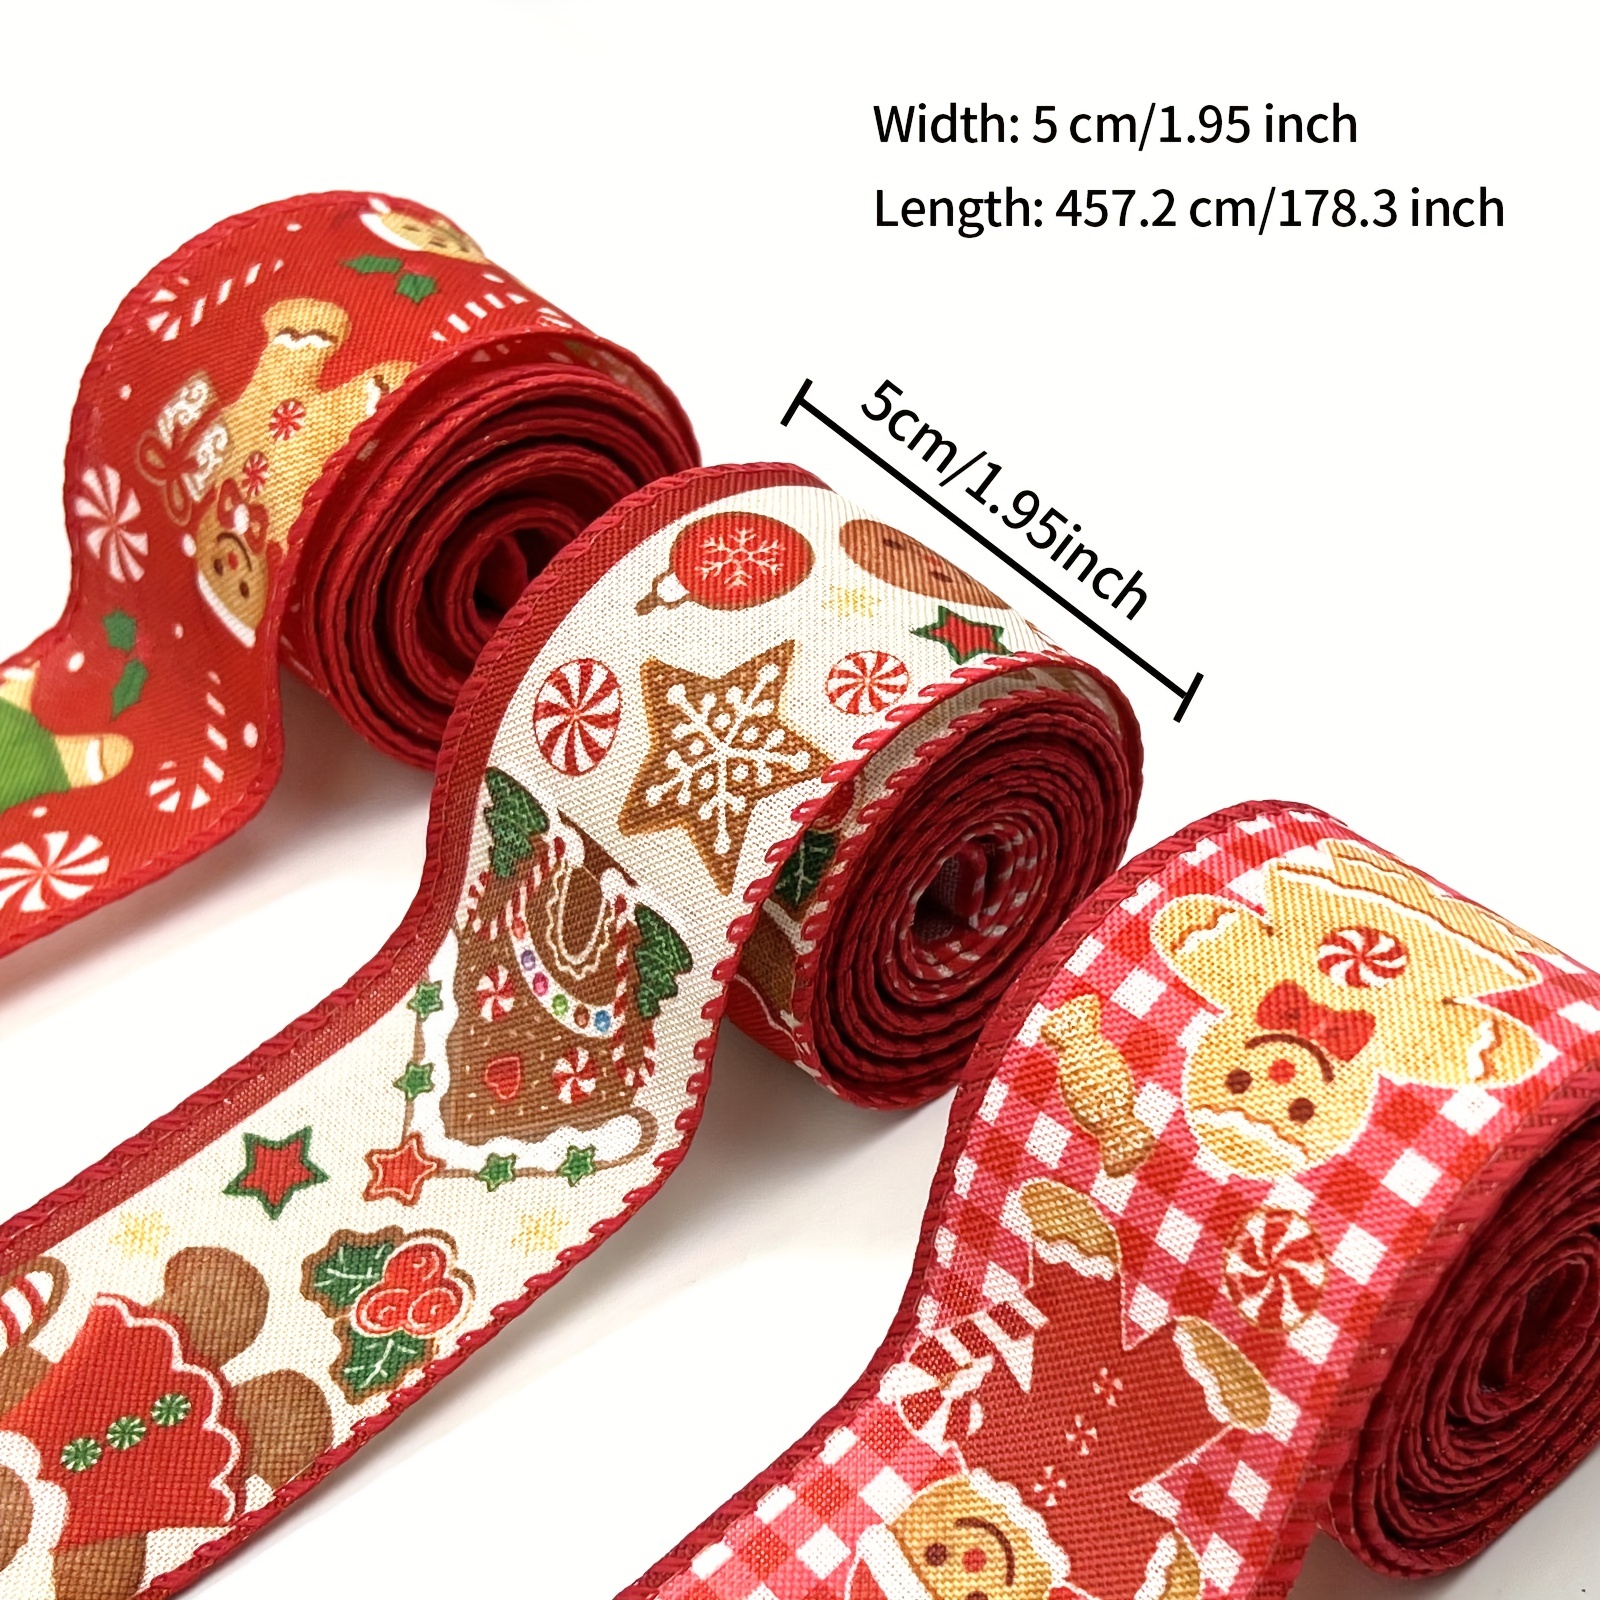 Red Ribbon 1/2 Wide - 5 Yards